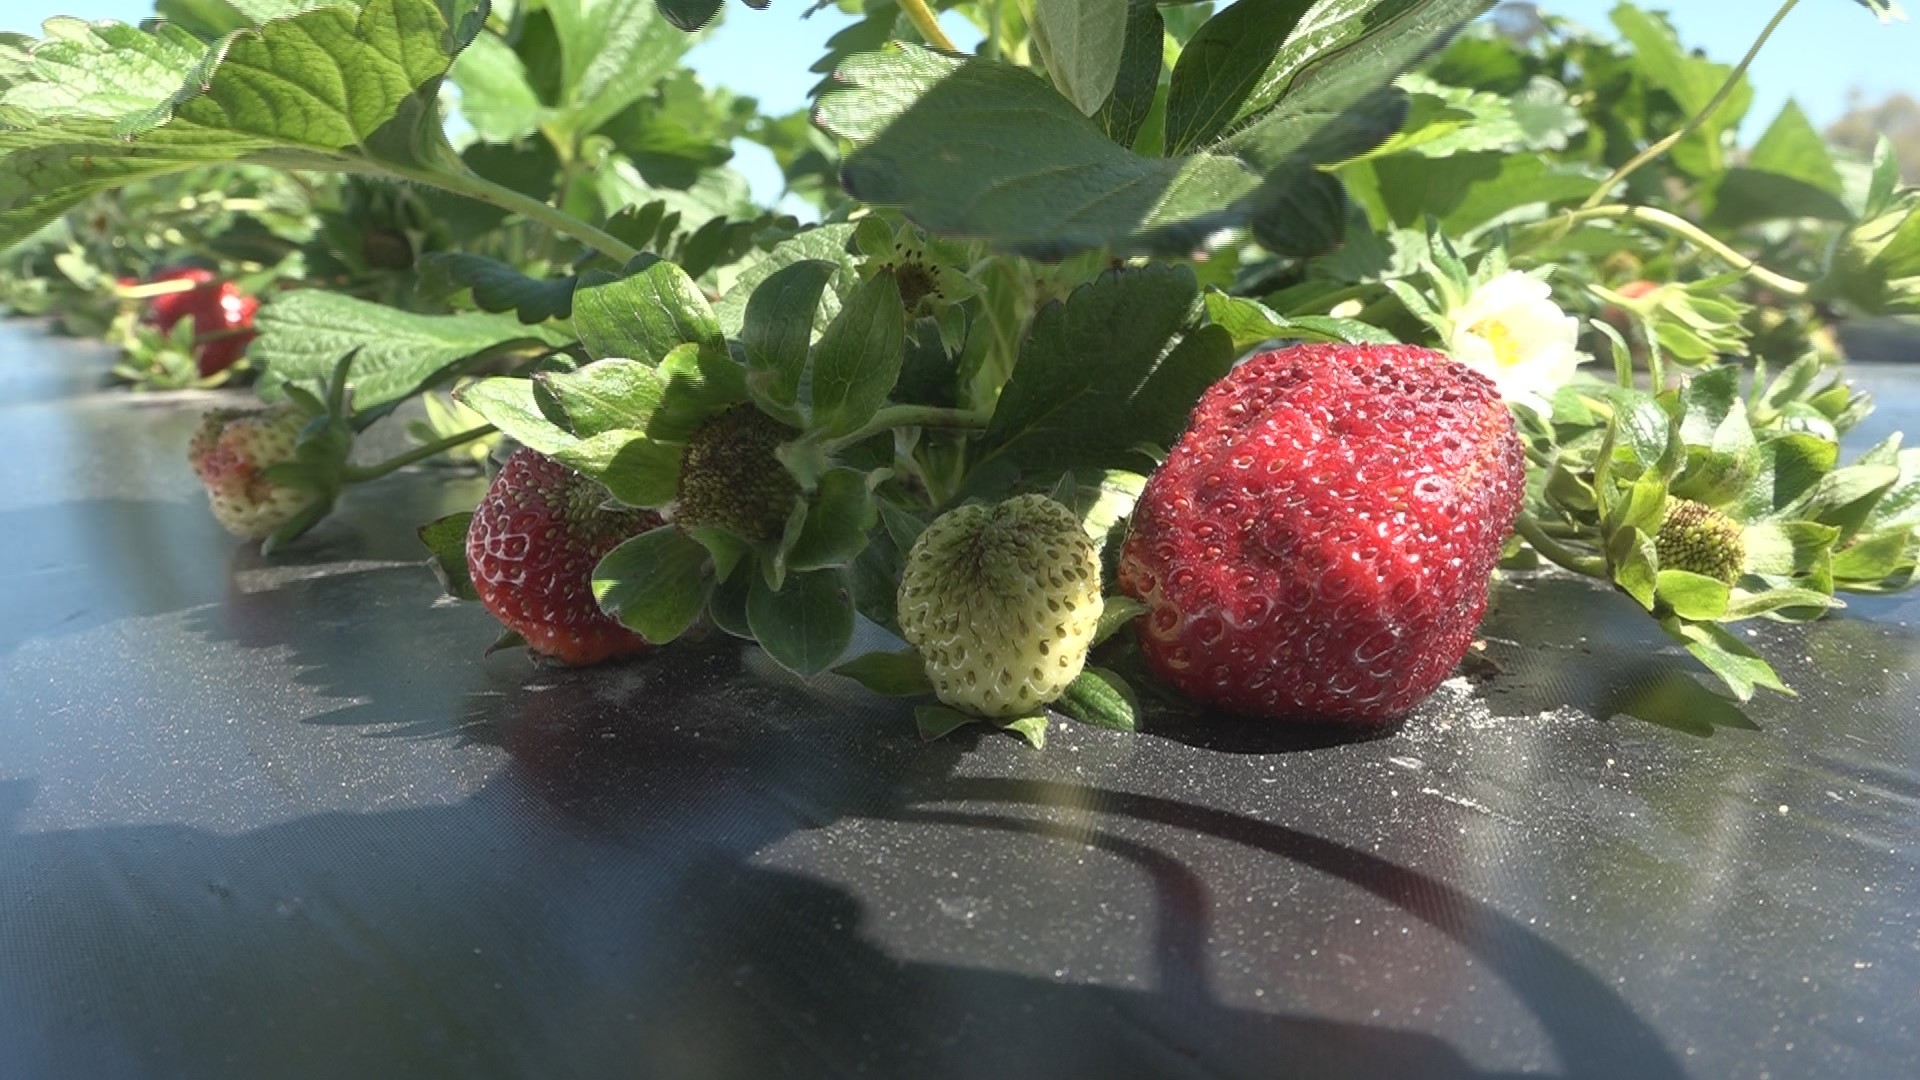 The hard freeze can impact fruit farms here in Central Georgia and farmers will soon access the damages.